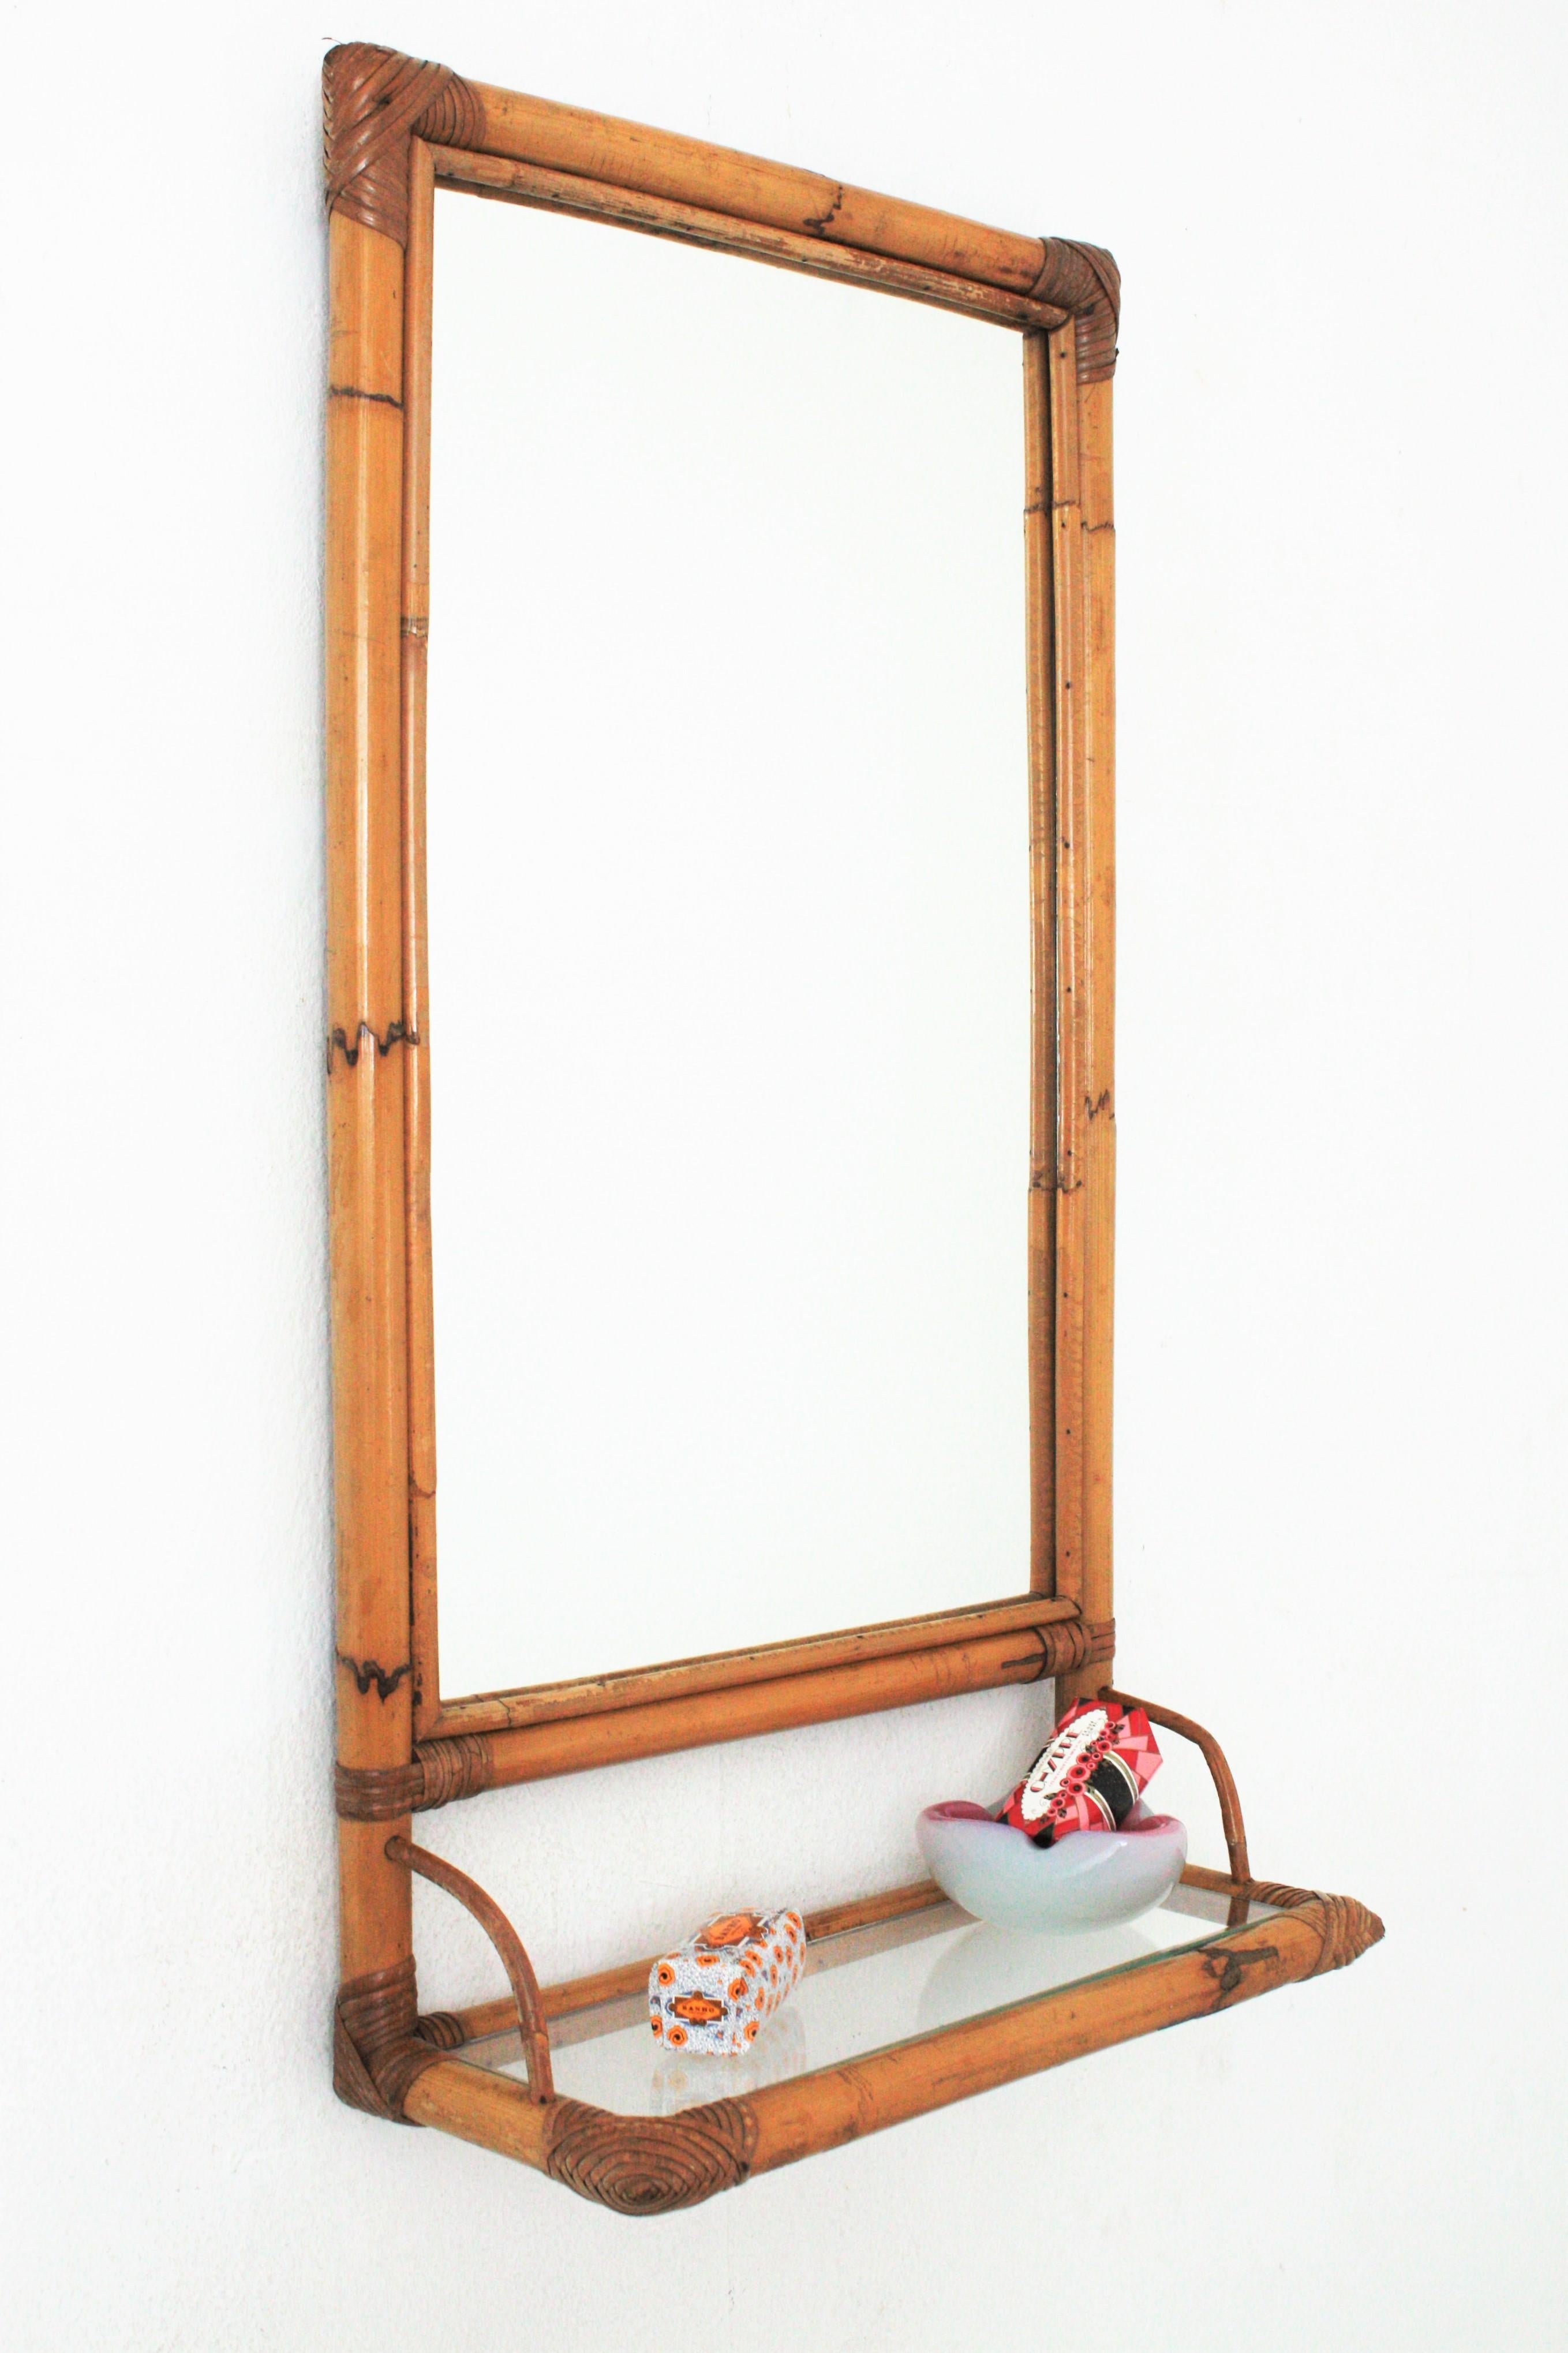 Cool handcrafted rectangular mirror with bamboo frame and glass shelf, Spain, 1960s.
This mirror features a bamboo rectangular structure holding a glass shelf. It has woven rattan accents at the corners.
This mirror will add a fresh accent to a